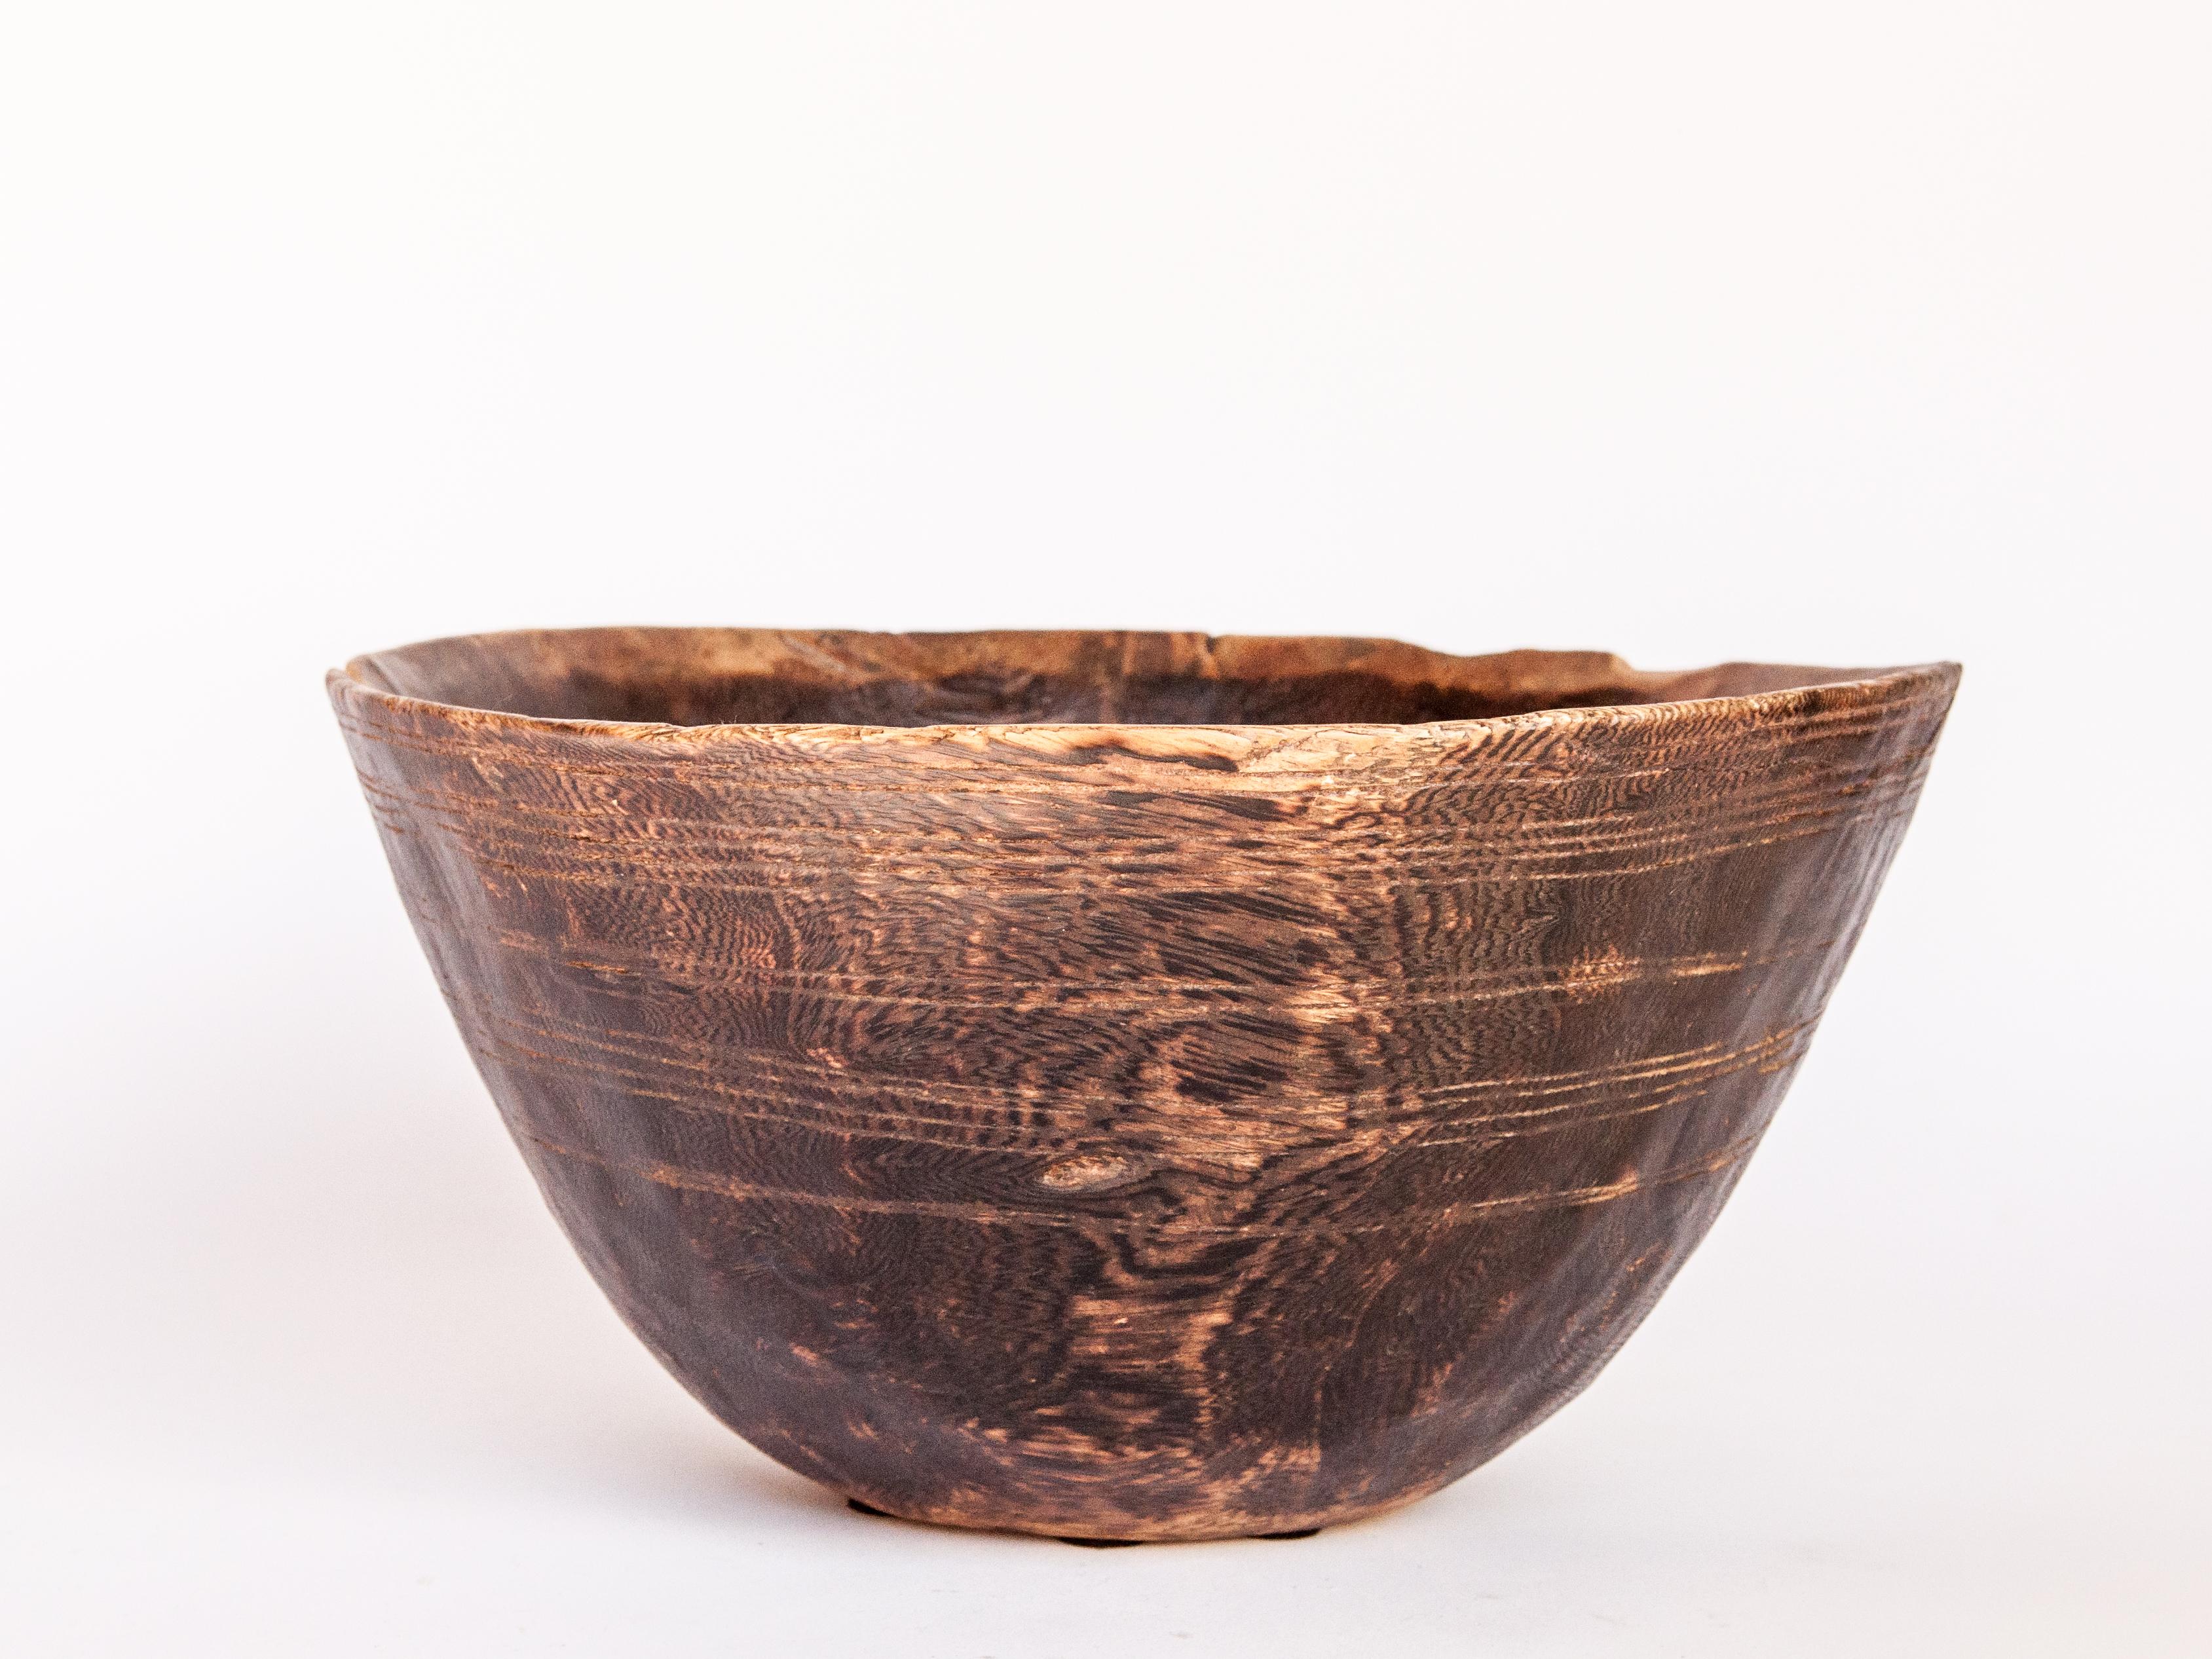 Hand-Carved Tribal Wooden Bowl, Strongly Figured Wood, Tuareg, West Africa, Mid-20th Century